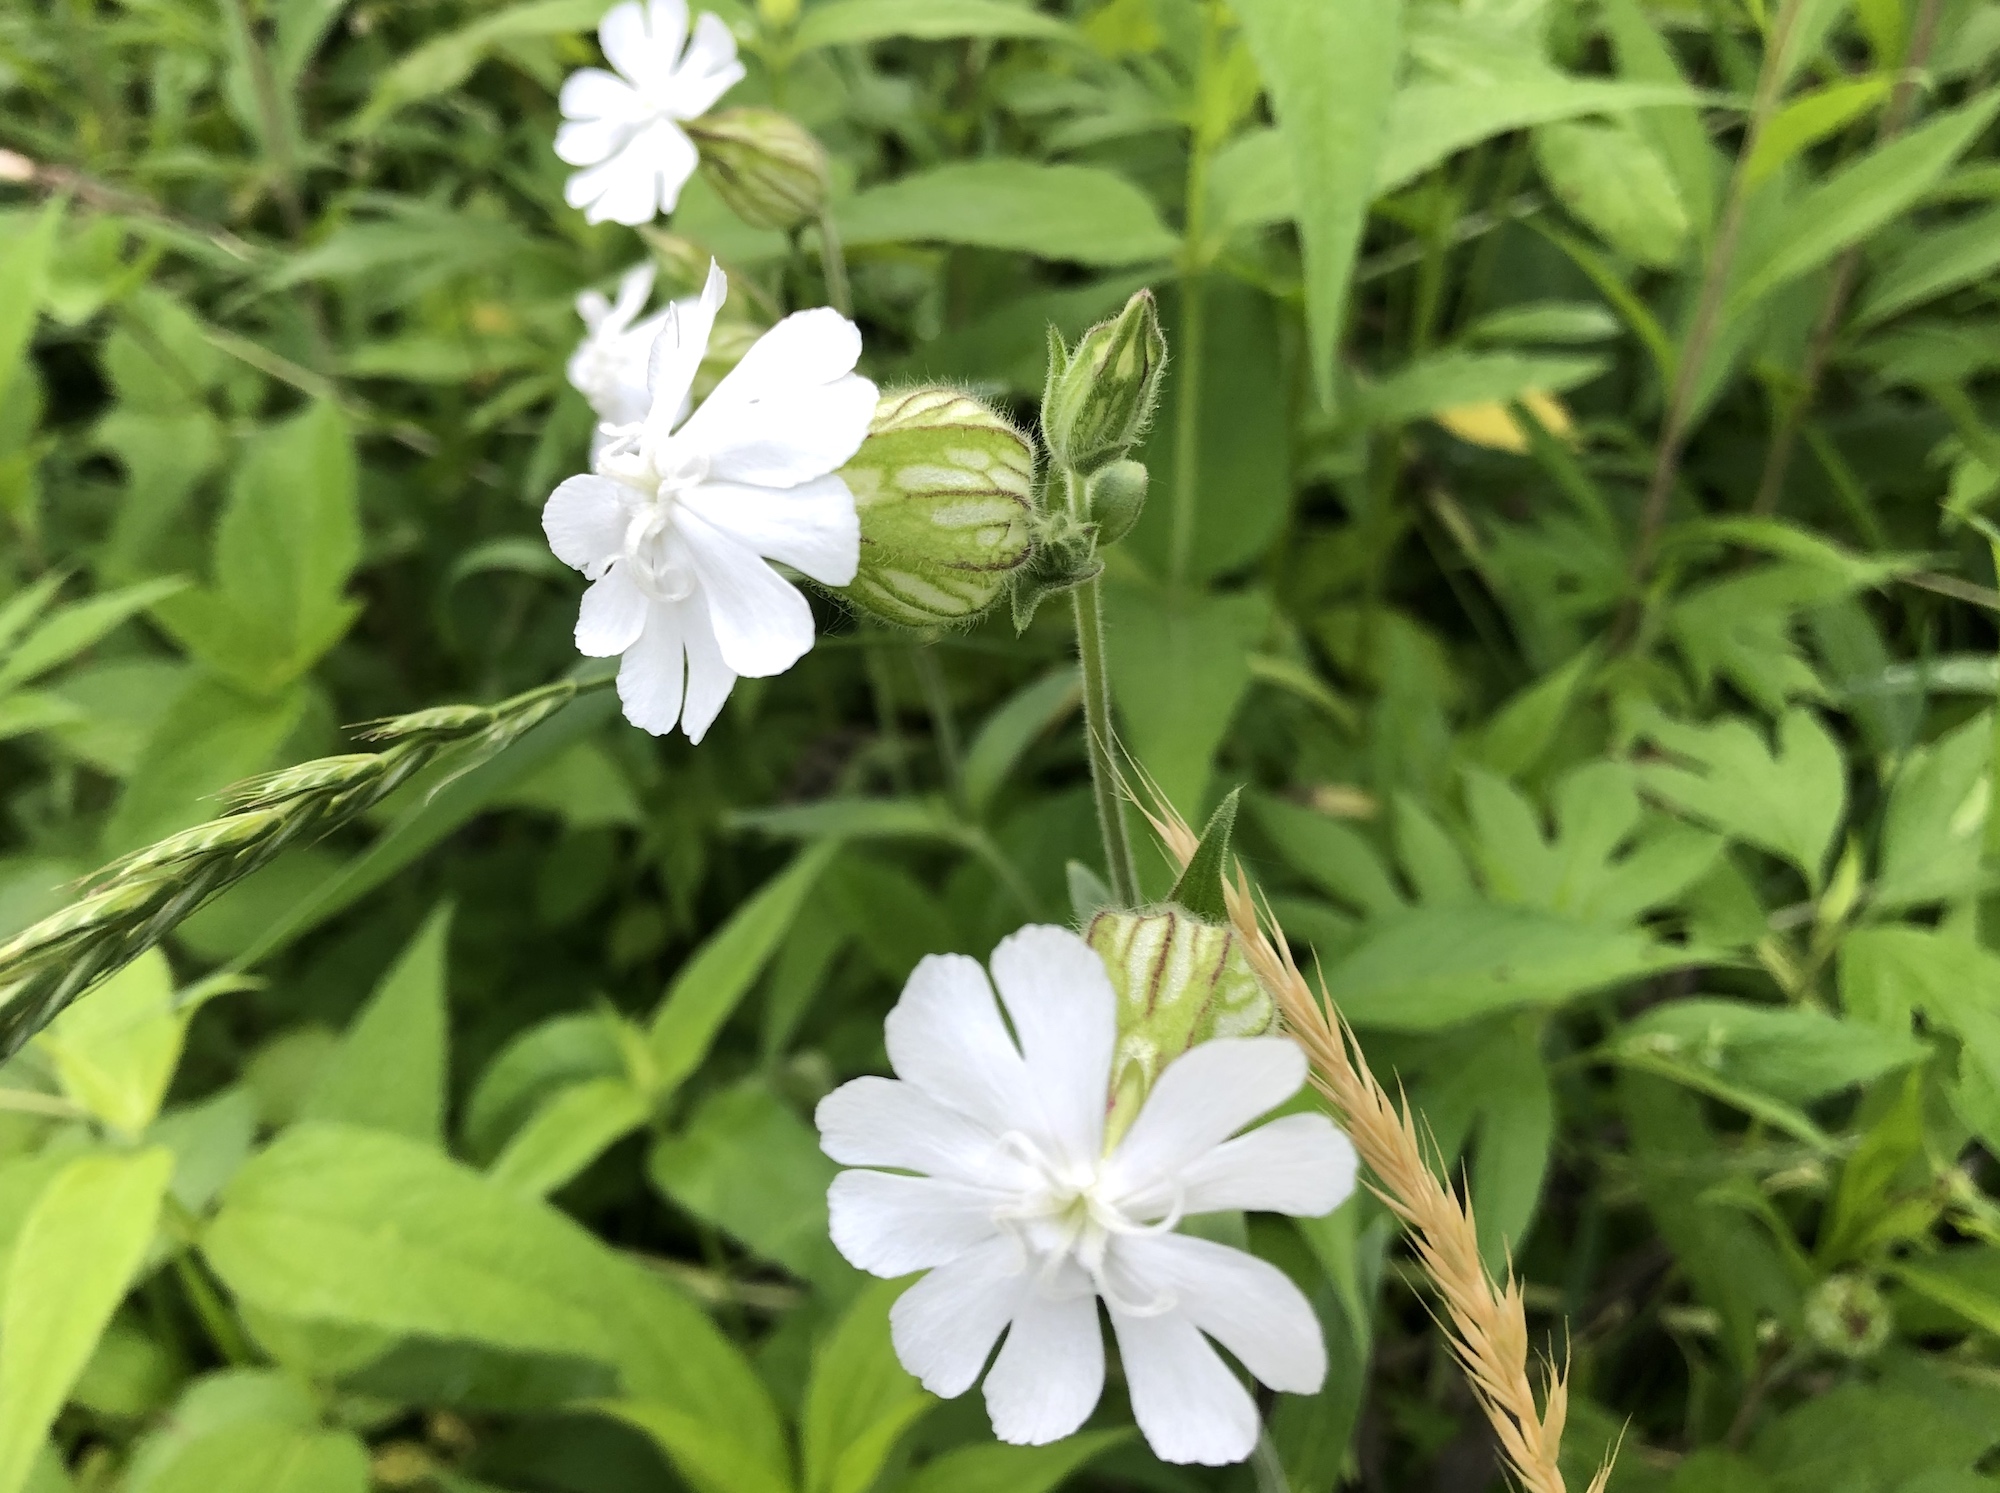 White Campion by Marion Dunn Pond on June 20, 2019.